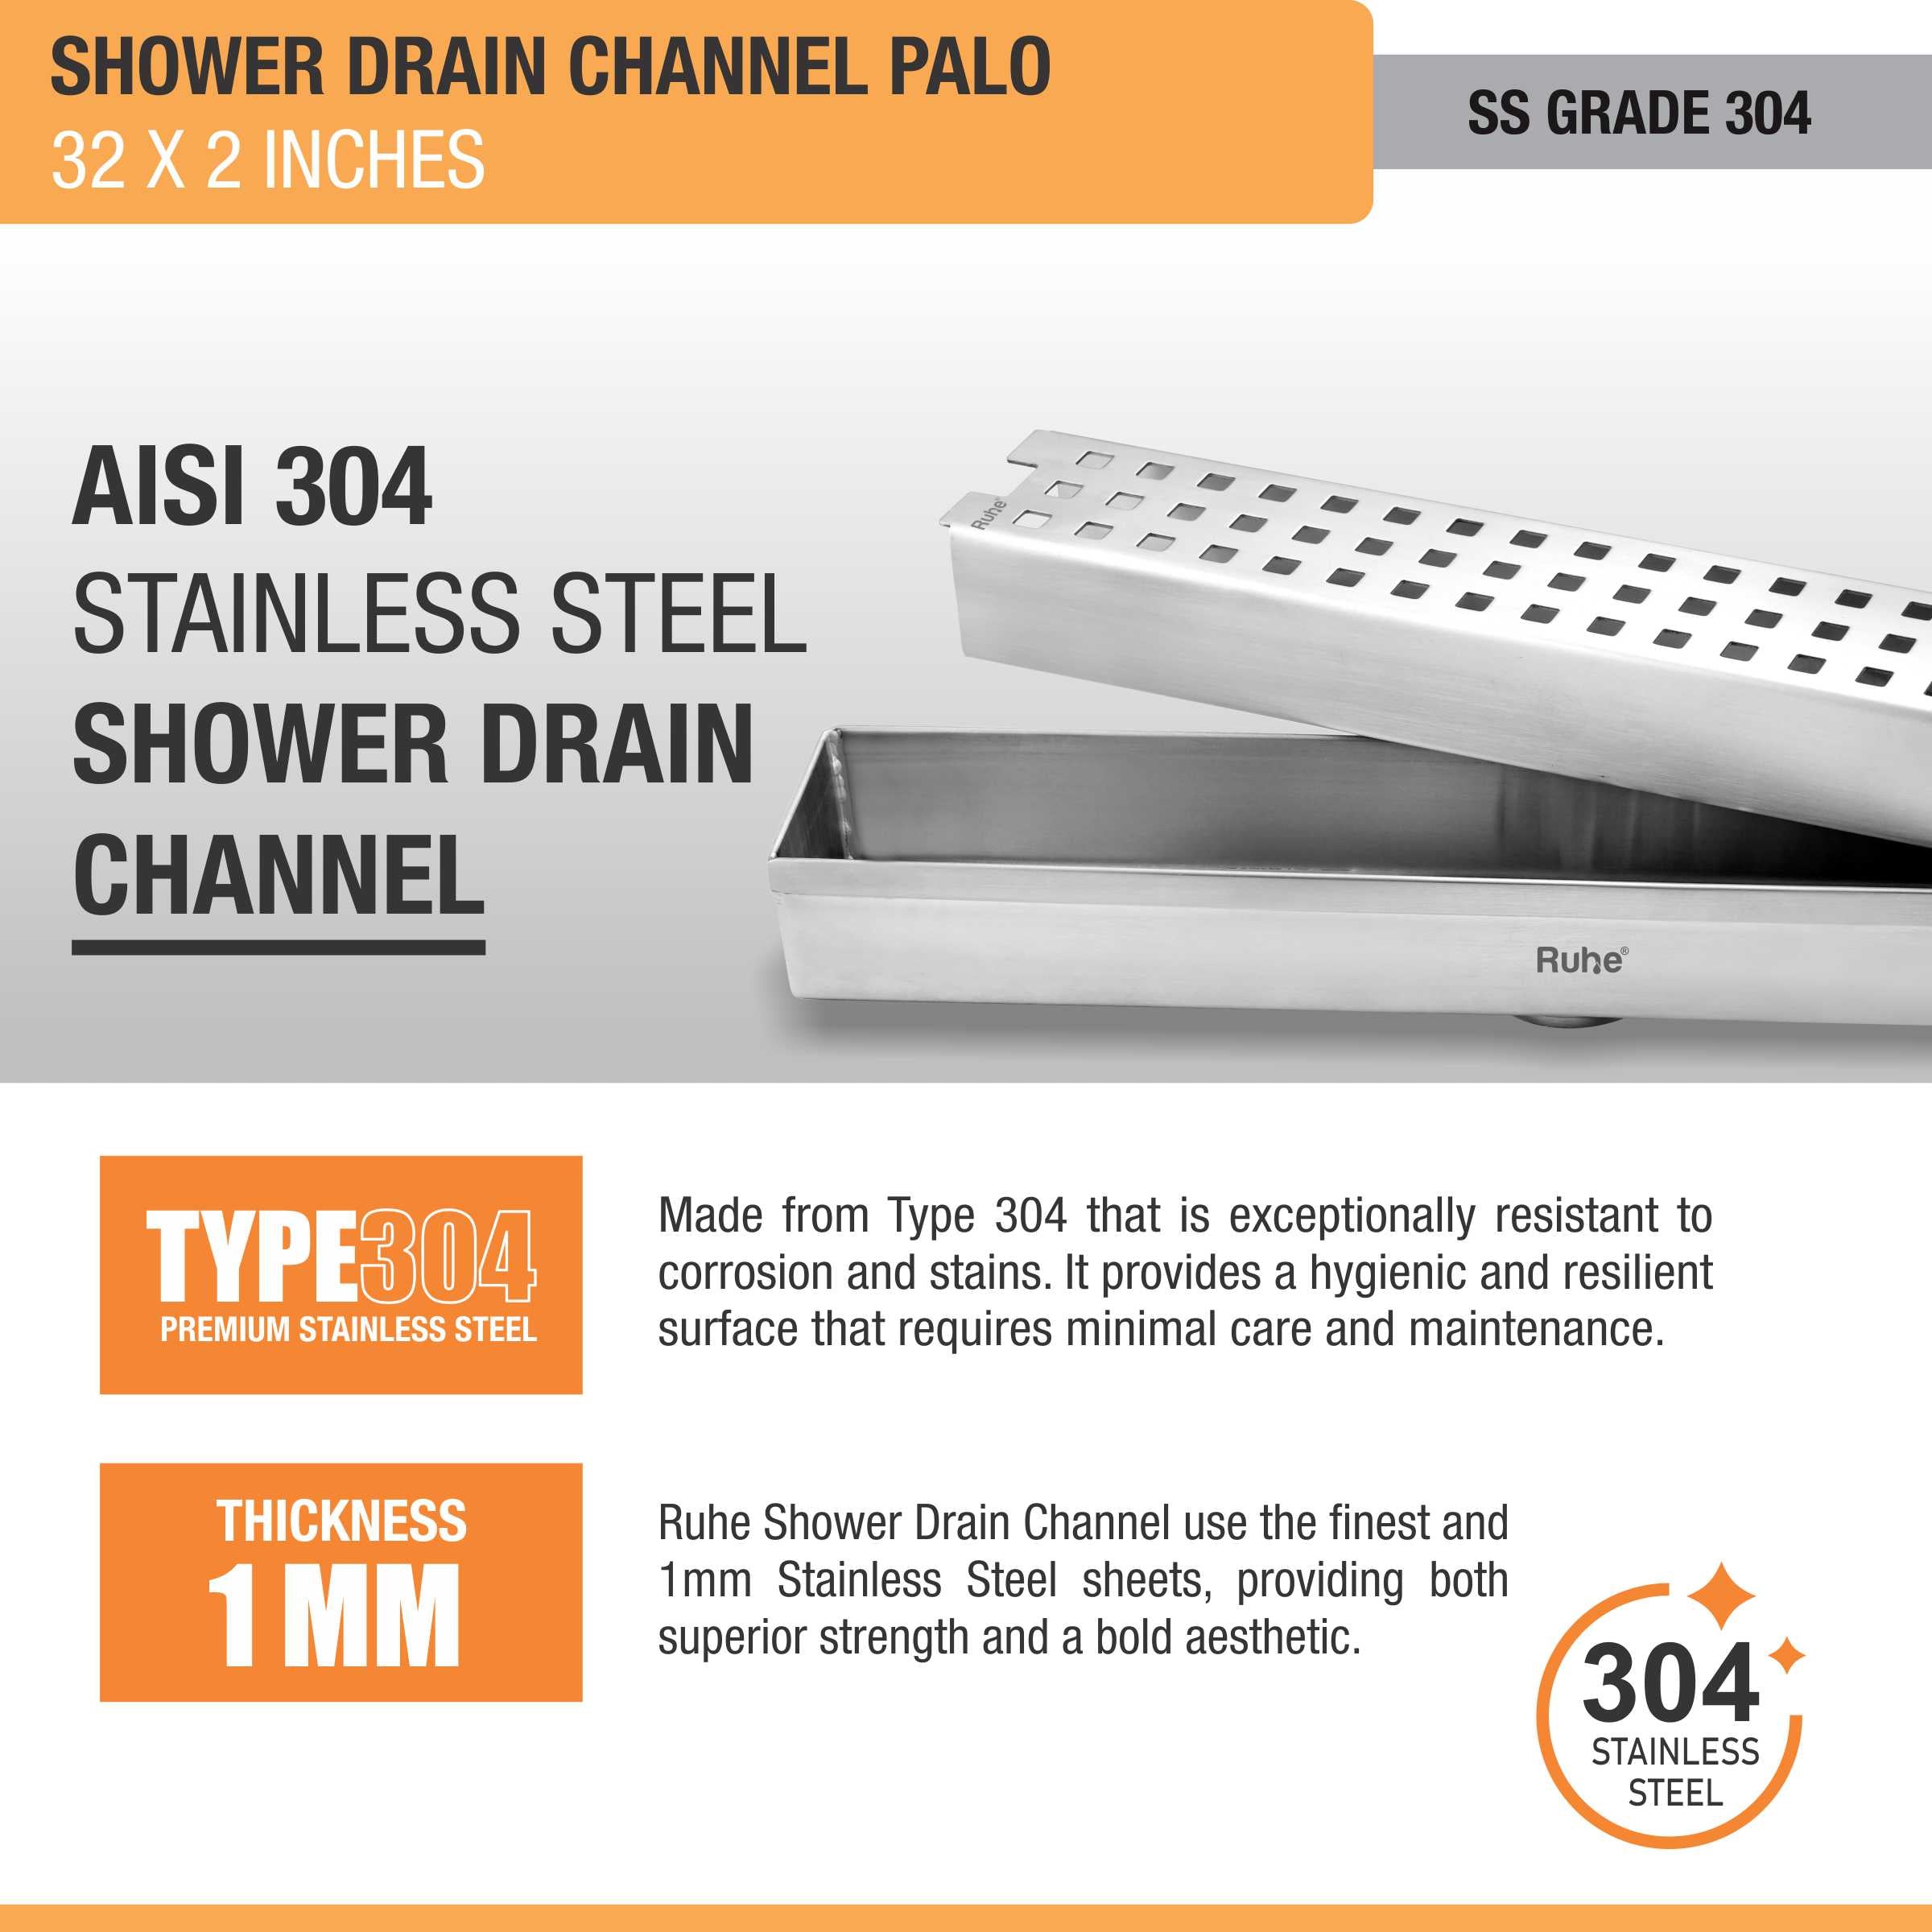 Palo Shower Drain Channel (32 X 2 Inches) (304 Grade) stainless steel